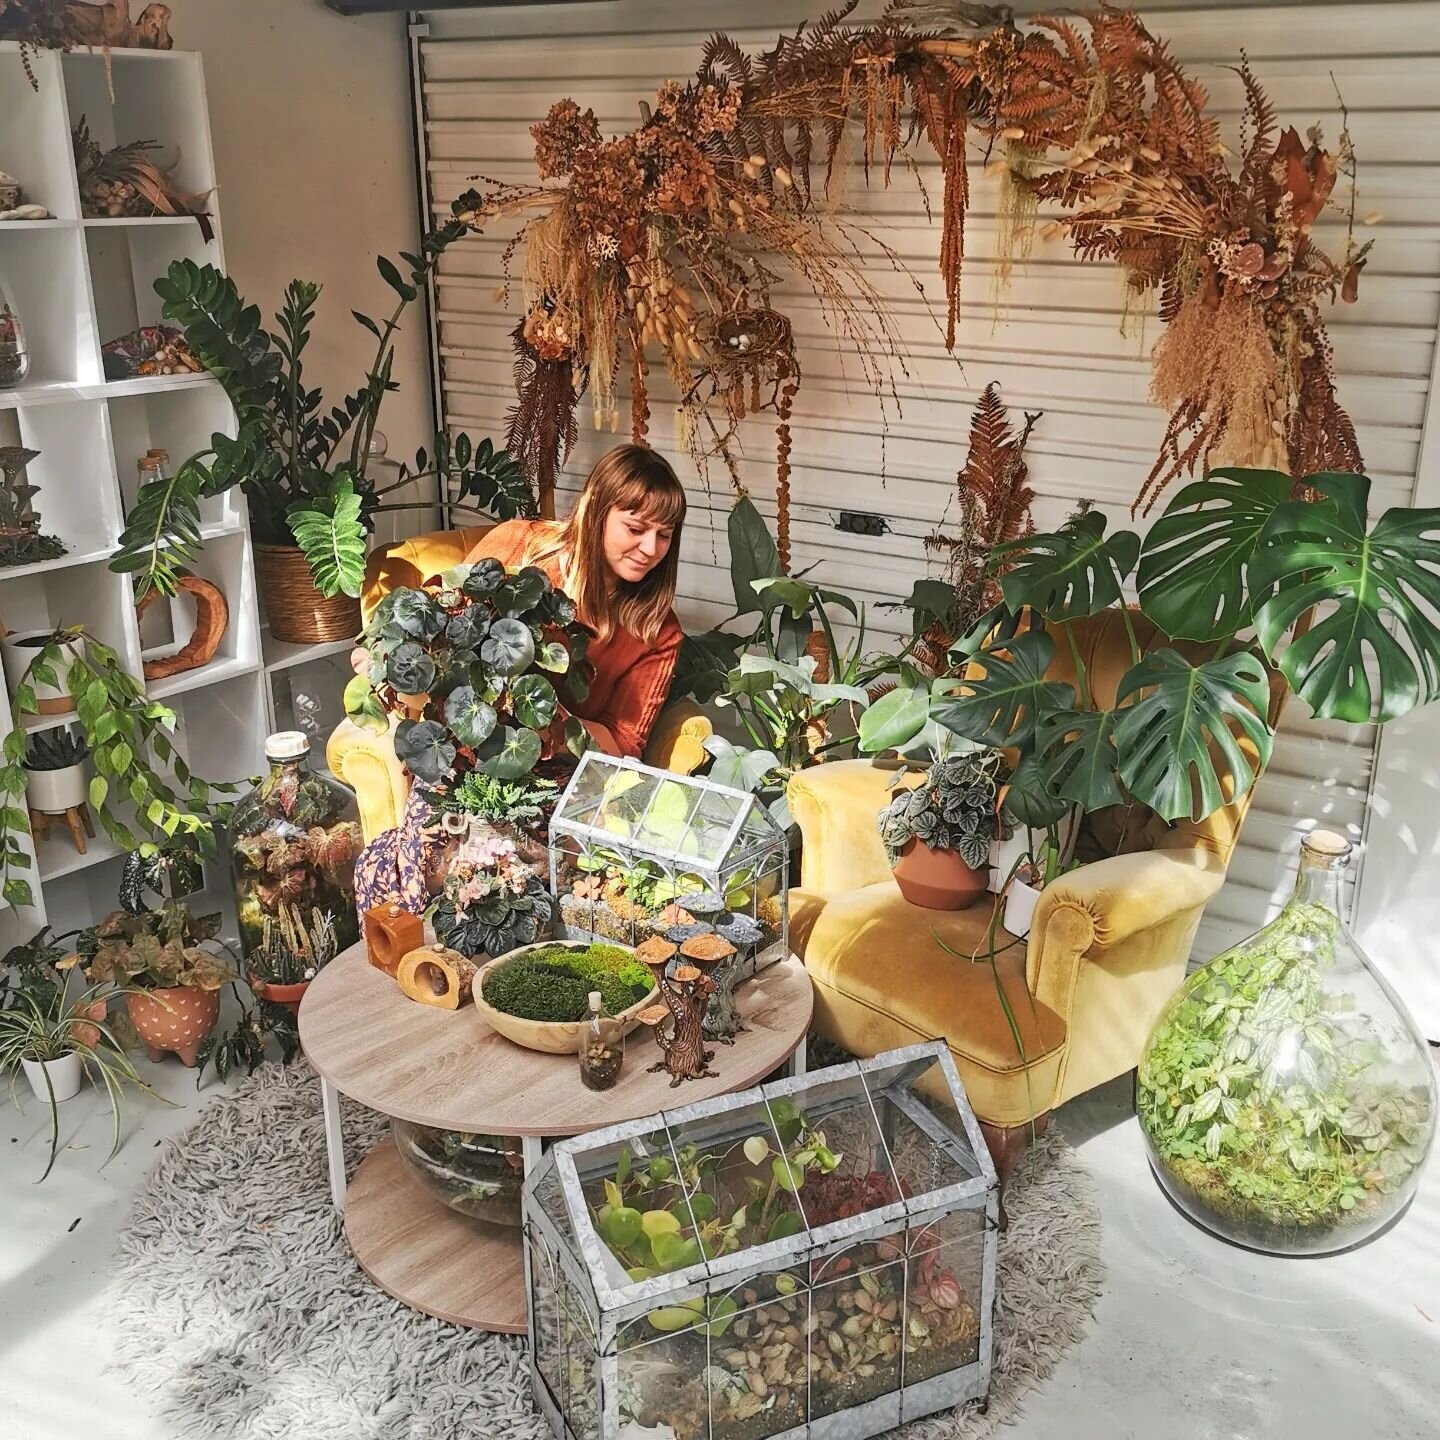 ANNOUNCEMENT!!! 📢📢📢

Kia ora everyone, I can't believe I'm saying this but I've decided to put my wonderful part-time business up for sale. I'm hoping to find a passionate plant lover who is keen to keep growing this wonderful opportunity. 

Since